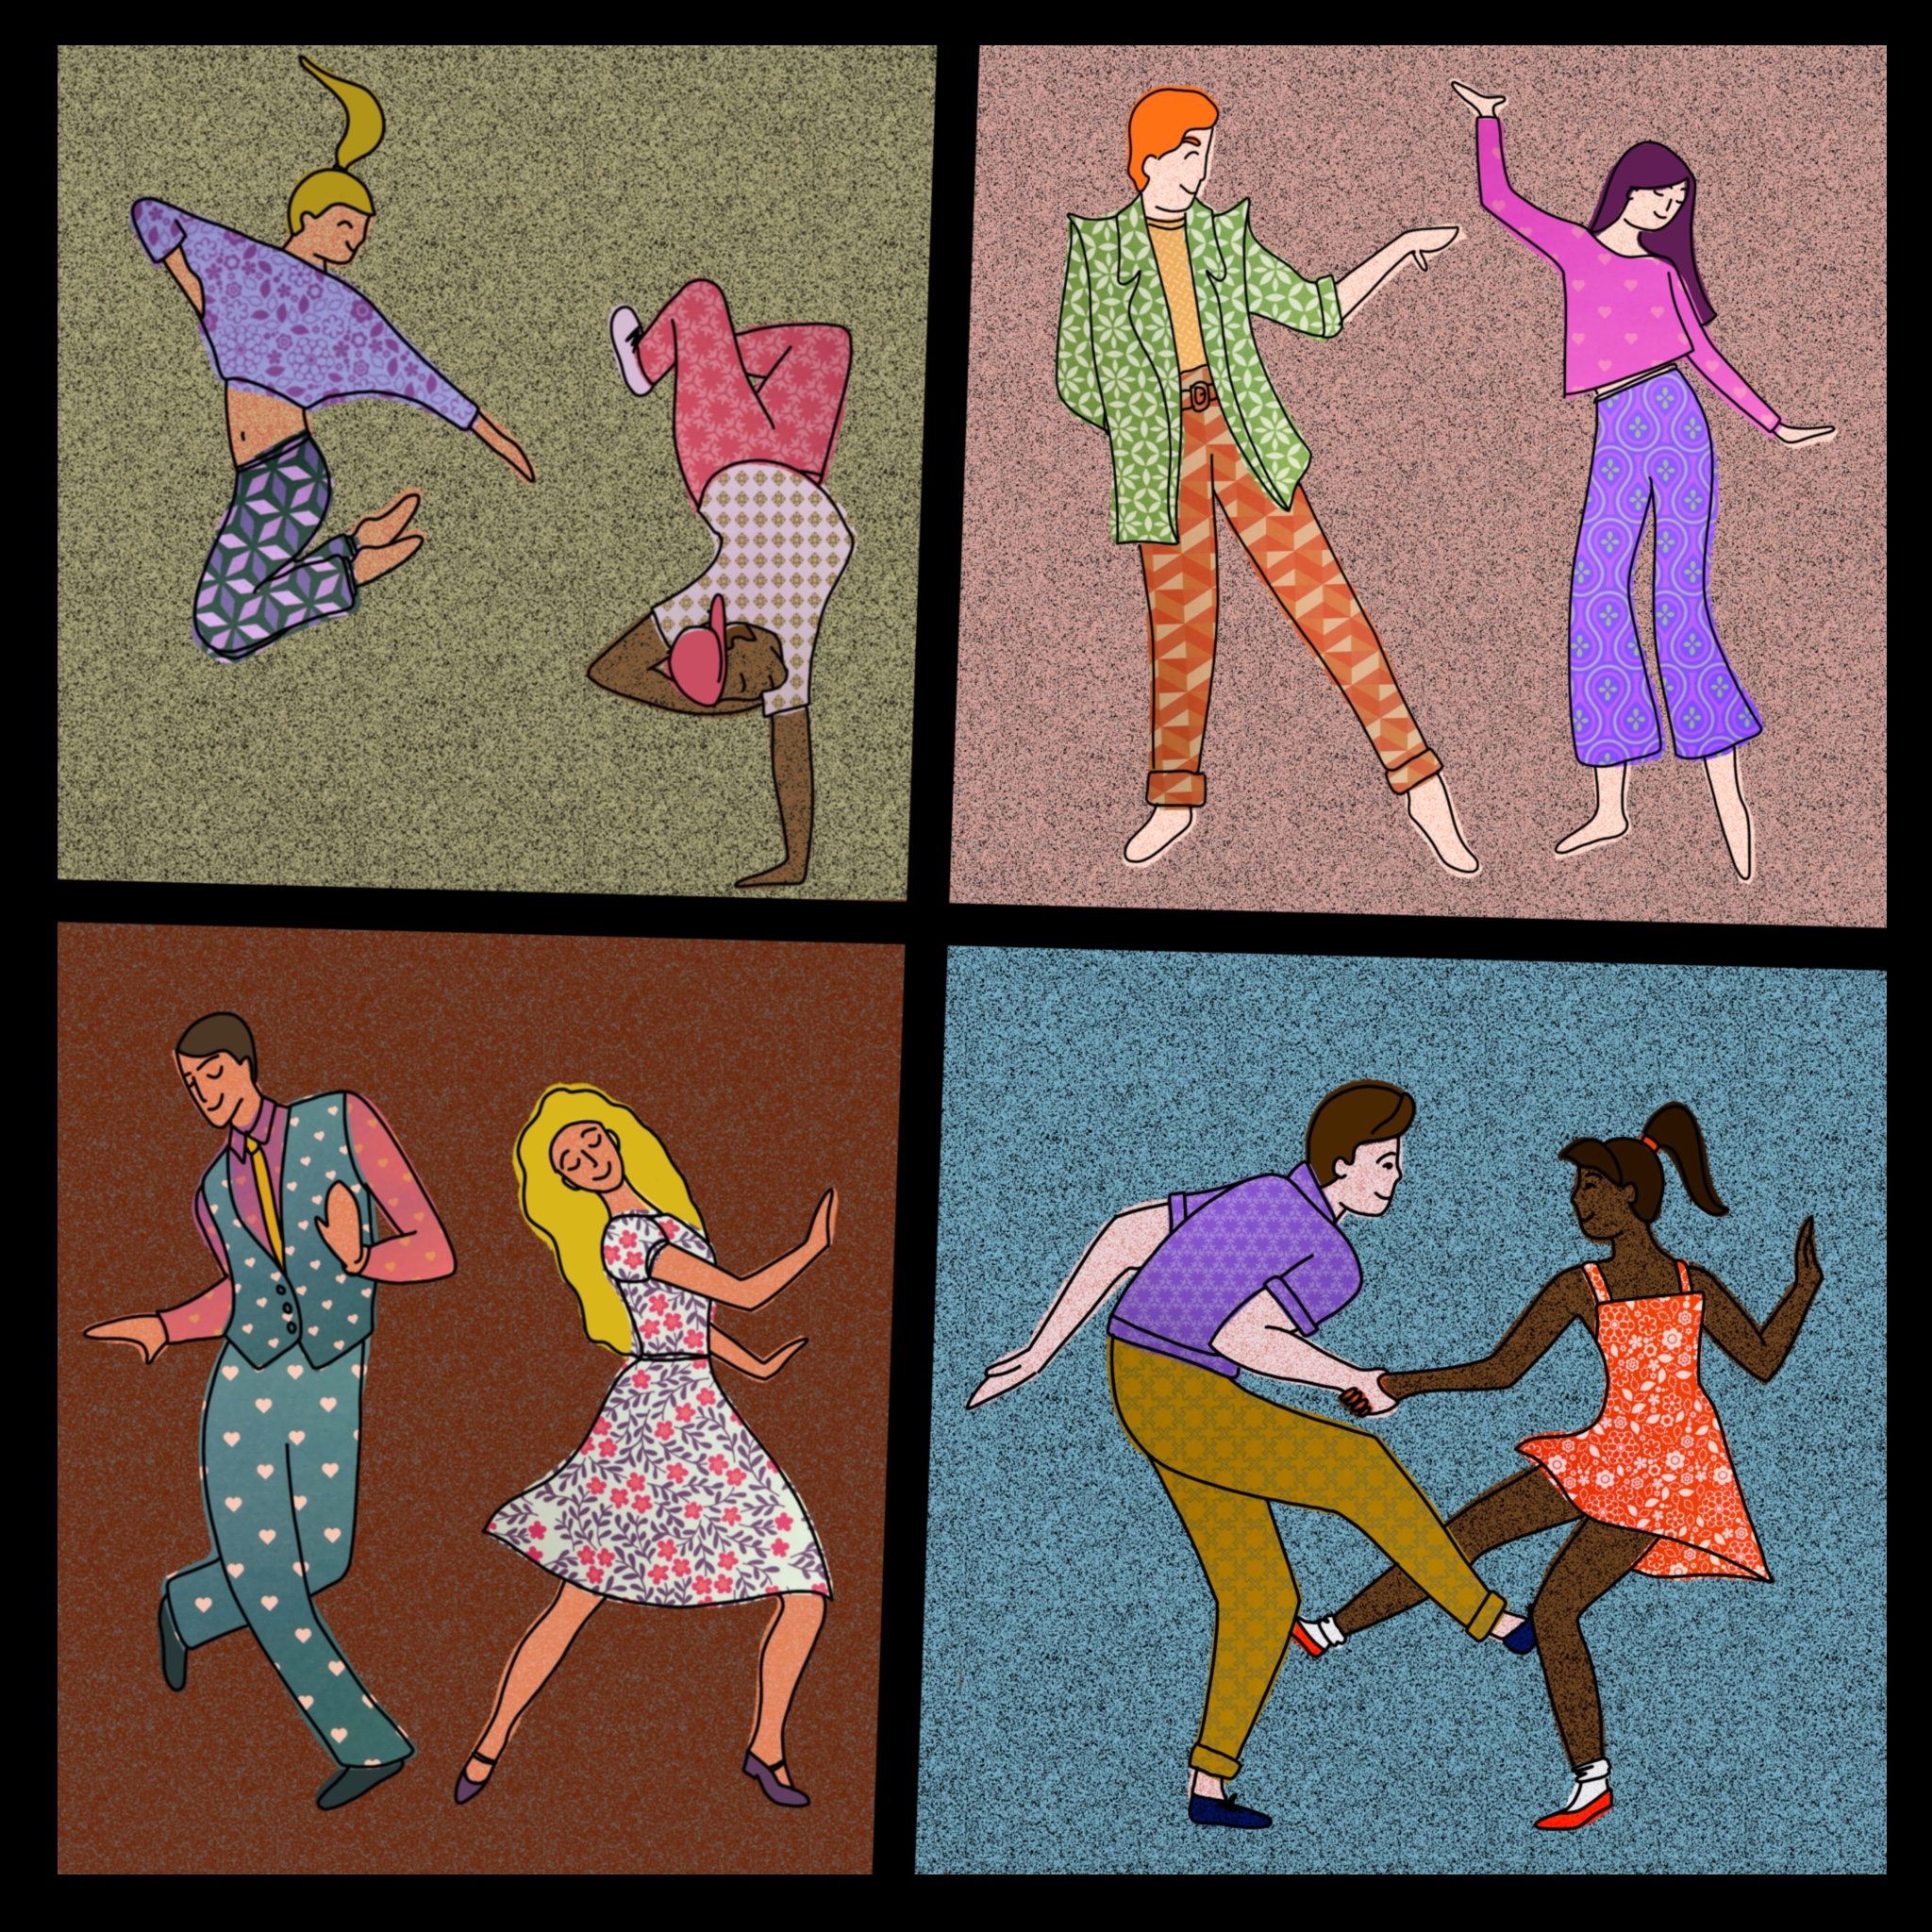 Digital drawing set into four parts. Each part features two dancers, one male and one female, in a different movement style. All the dancers smile, it is a happy picture.